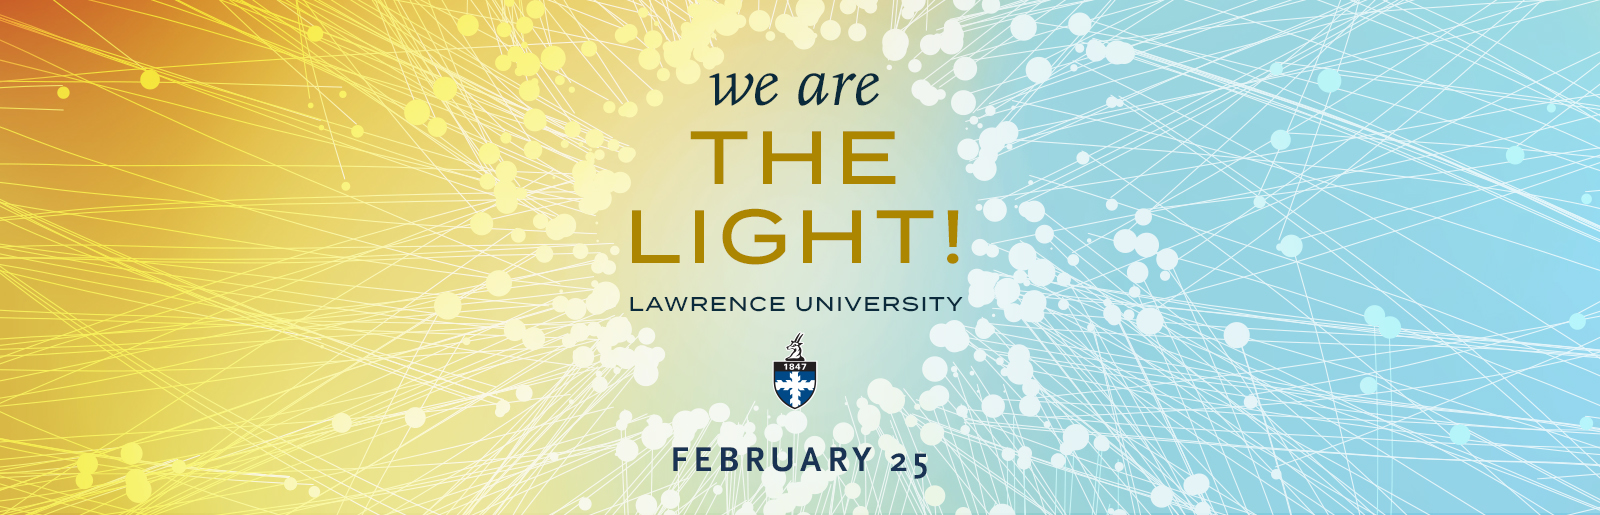 A blue and gold gradient and swirling light rays surround text that reads, "We Are the Light! Lawrence University, February 25"